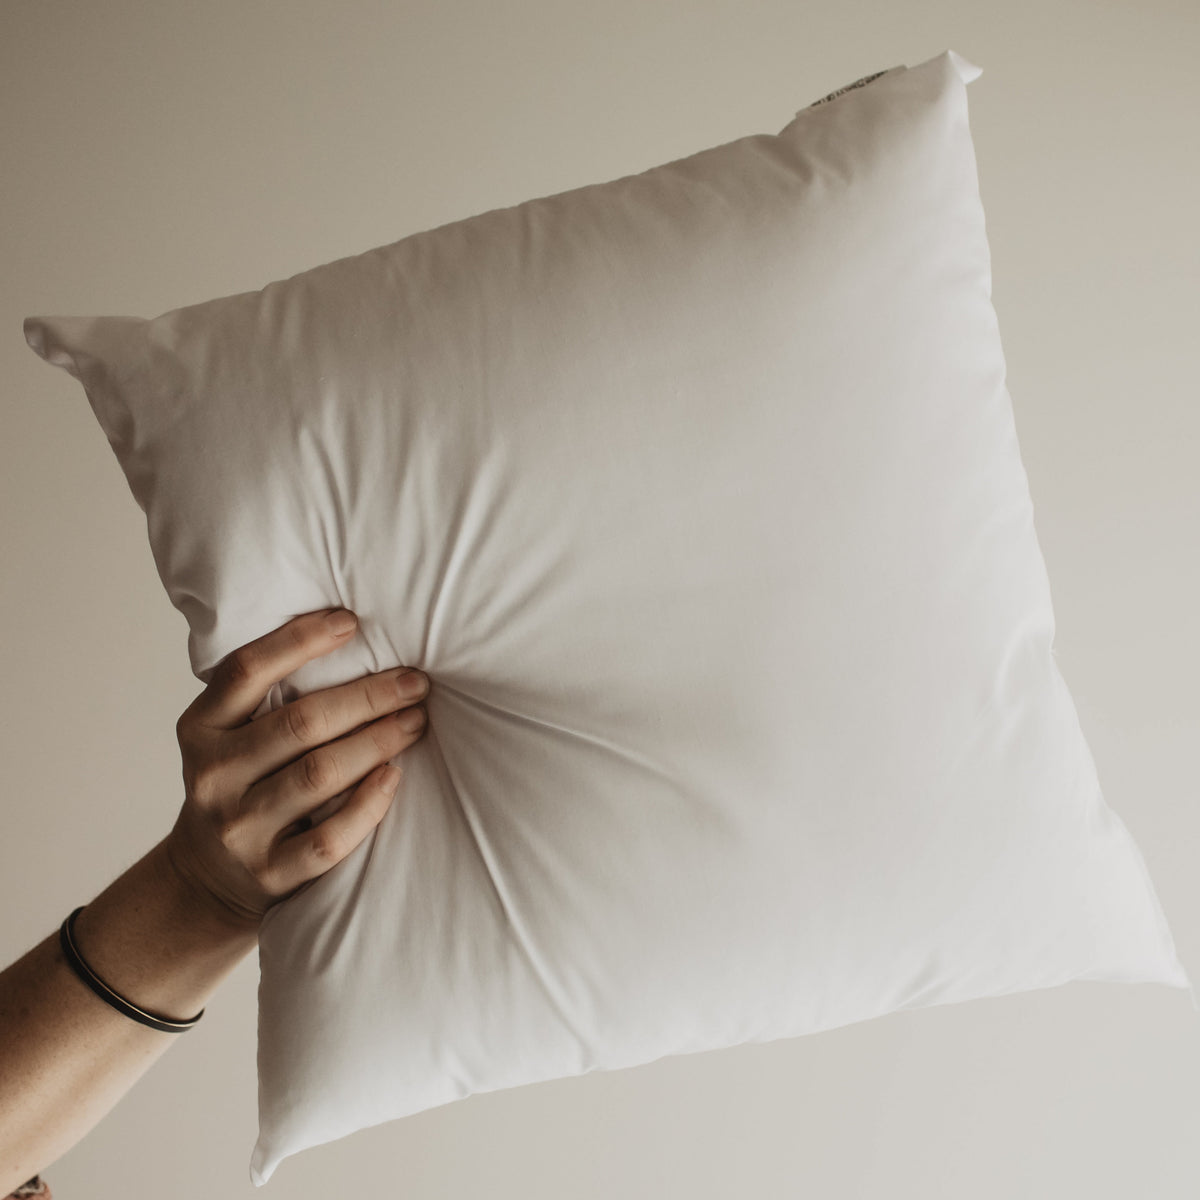 Pillow Inserts – Utility Canvas